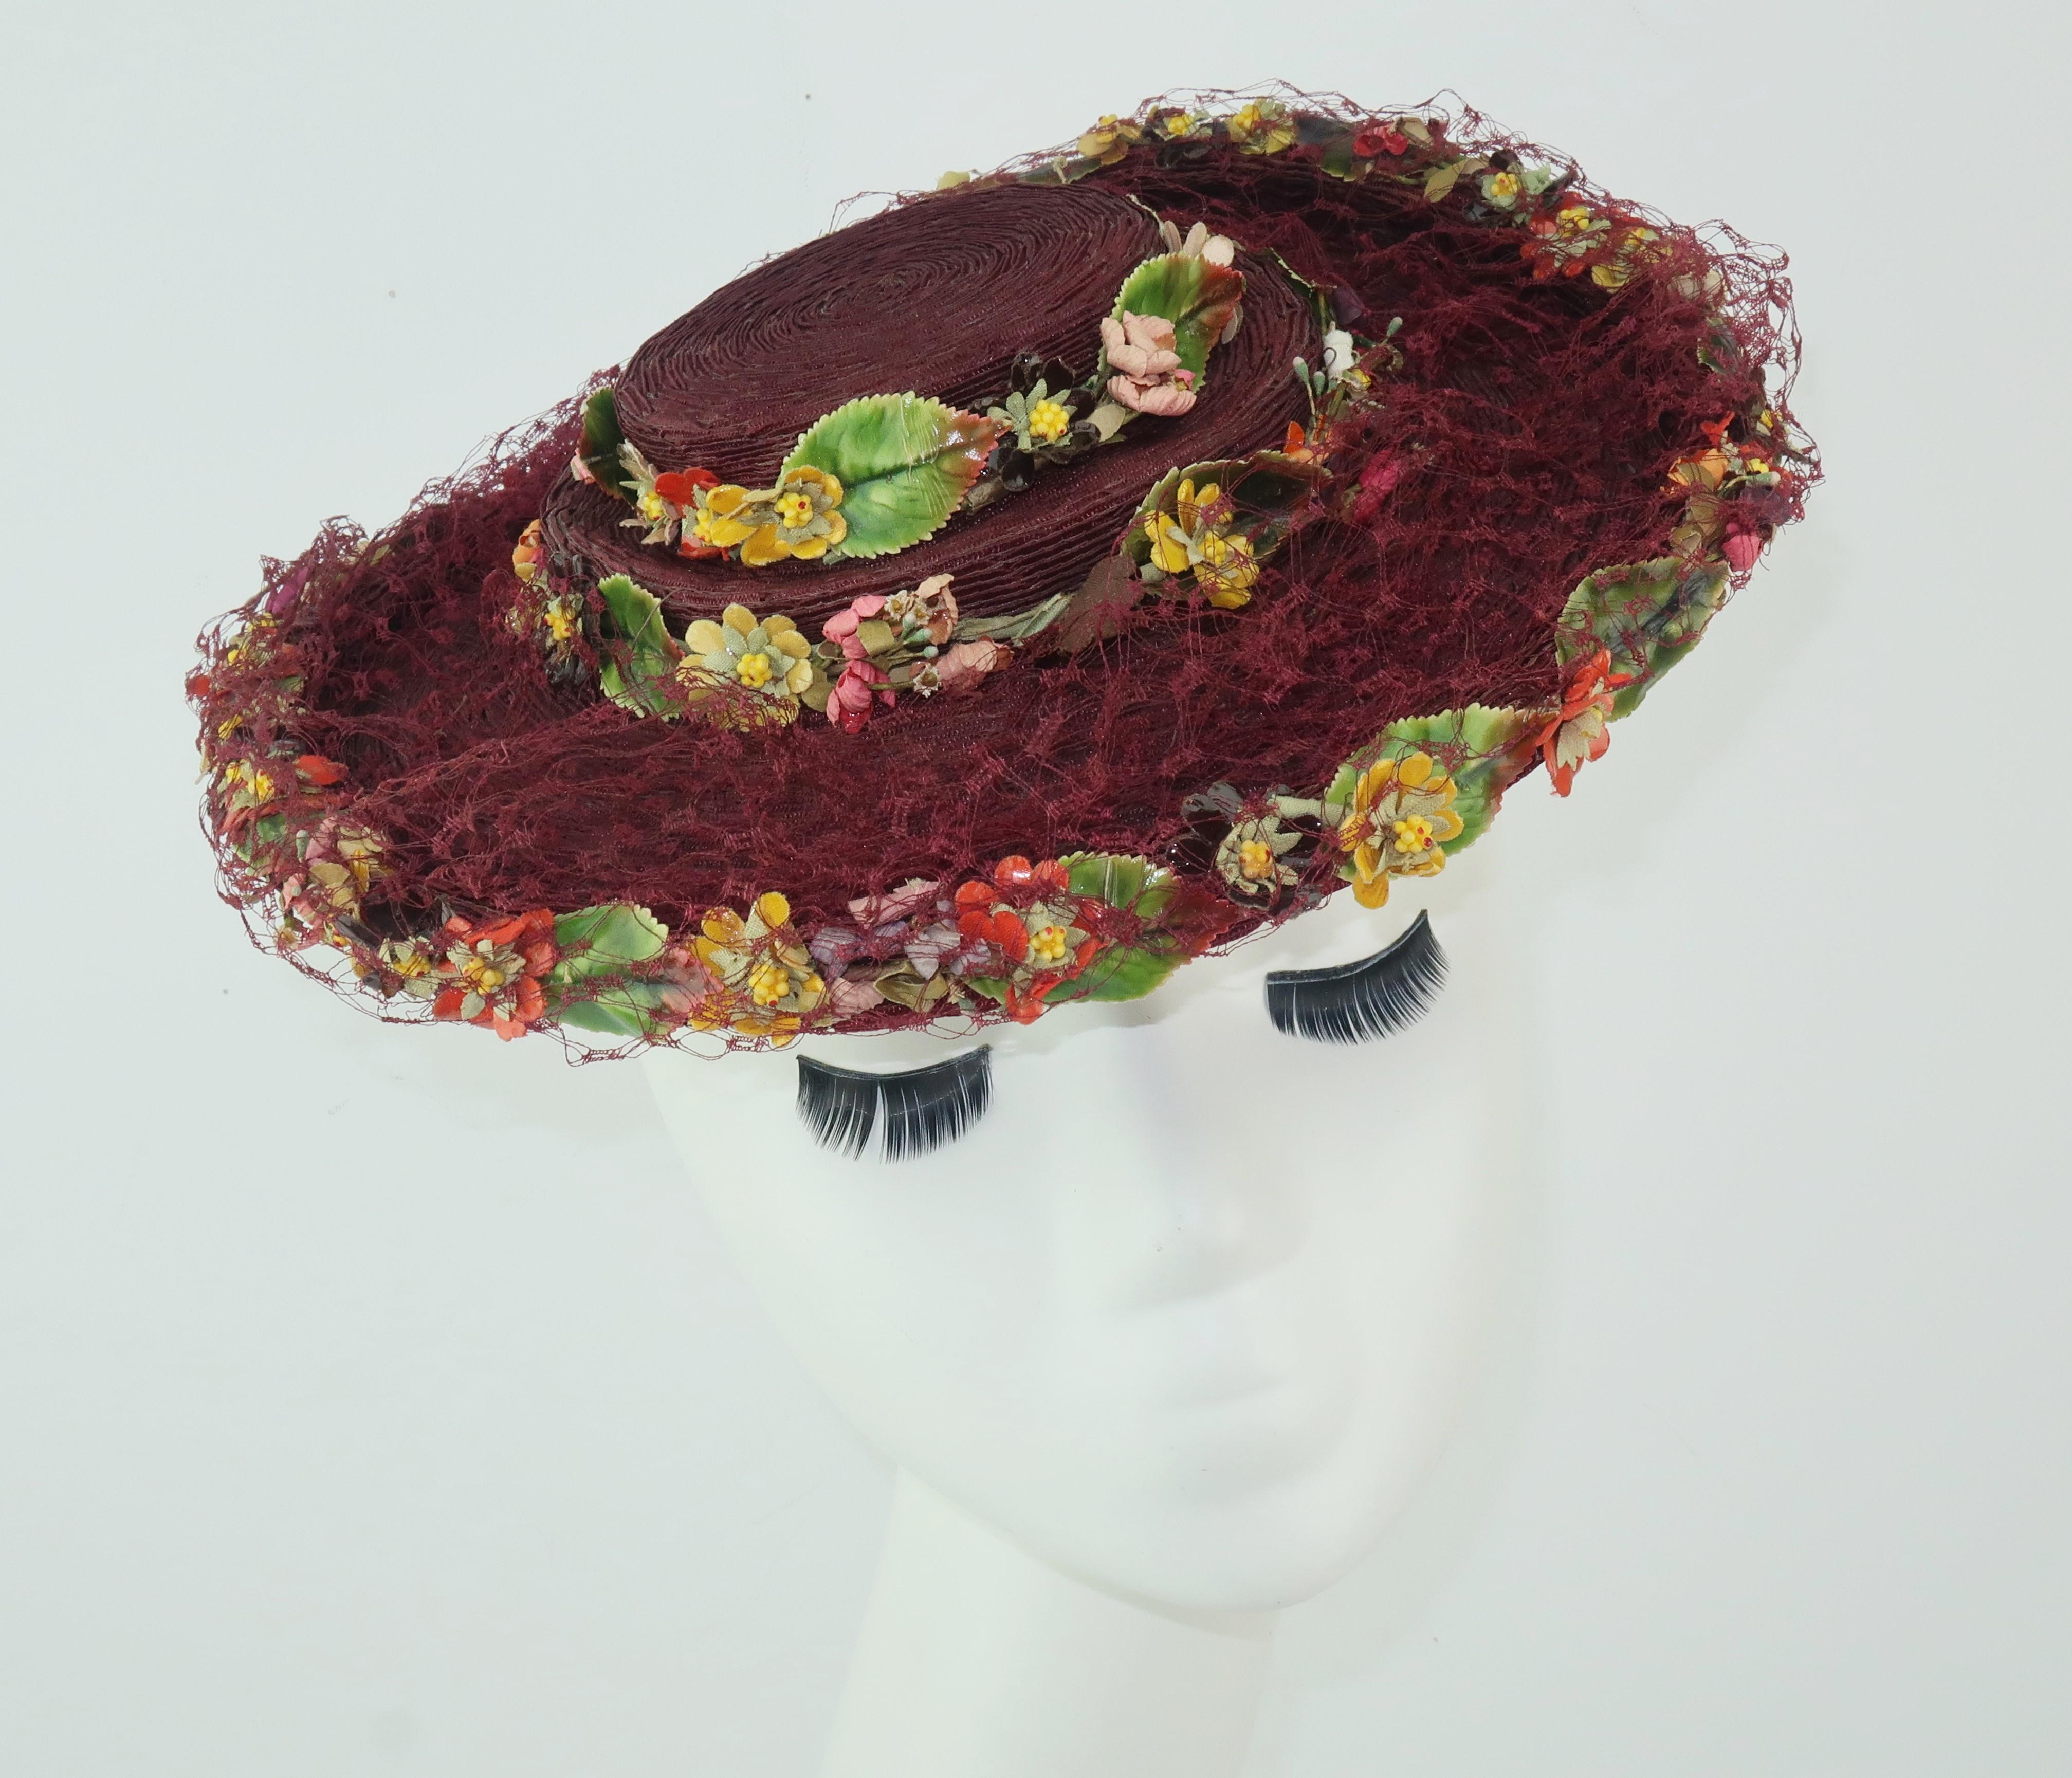 A C.1940 deep burgundy straw hat by Atlanta milliner, Ella Buchanan Gunn, embellished with lacquered silk flowers and netting.  The silk flowers introduce shades of green, coral red, yellow, aubergine and pink.  The unique shape of the hat is